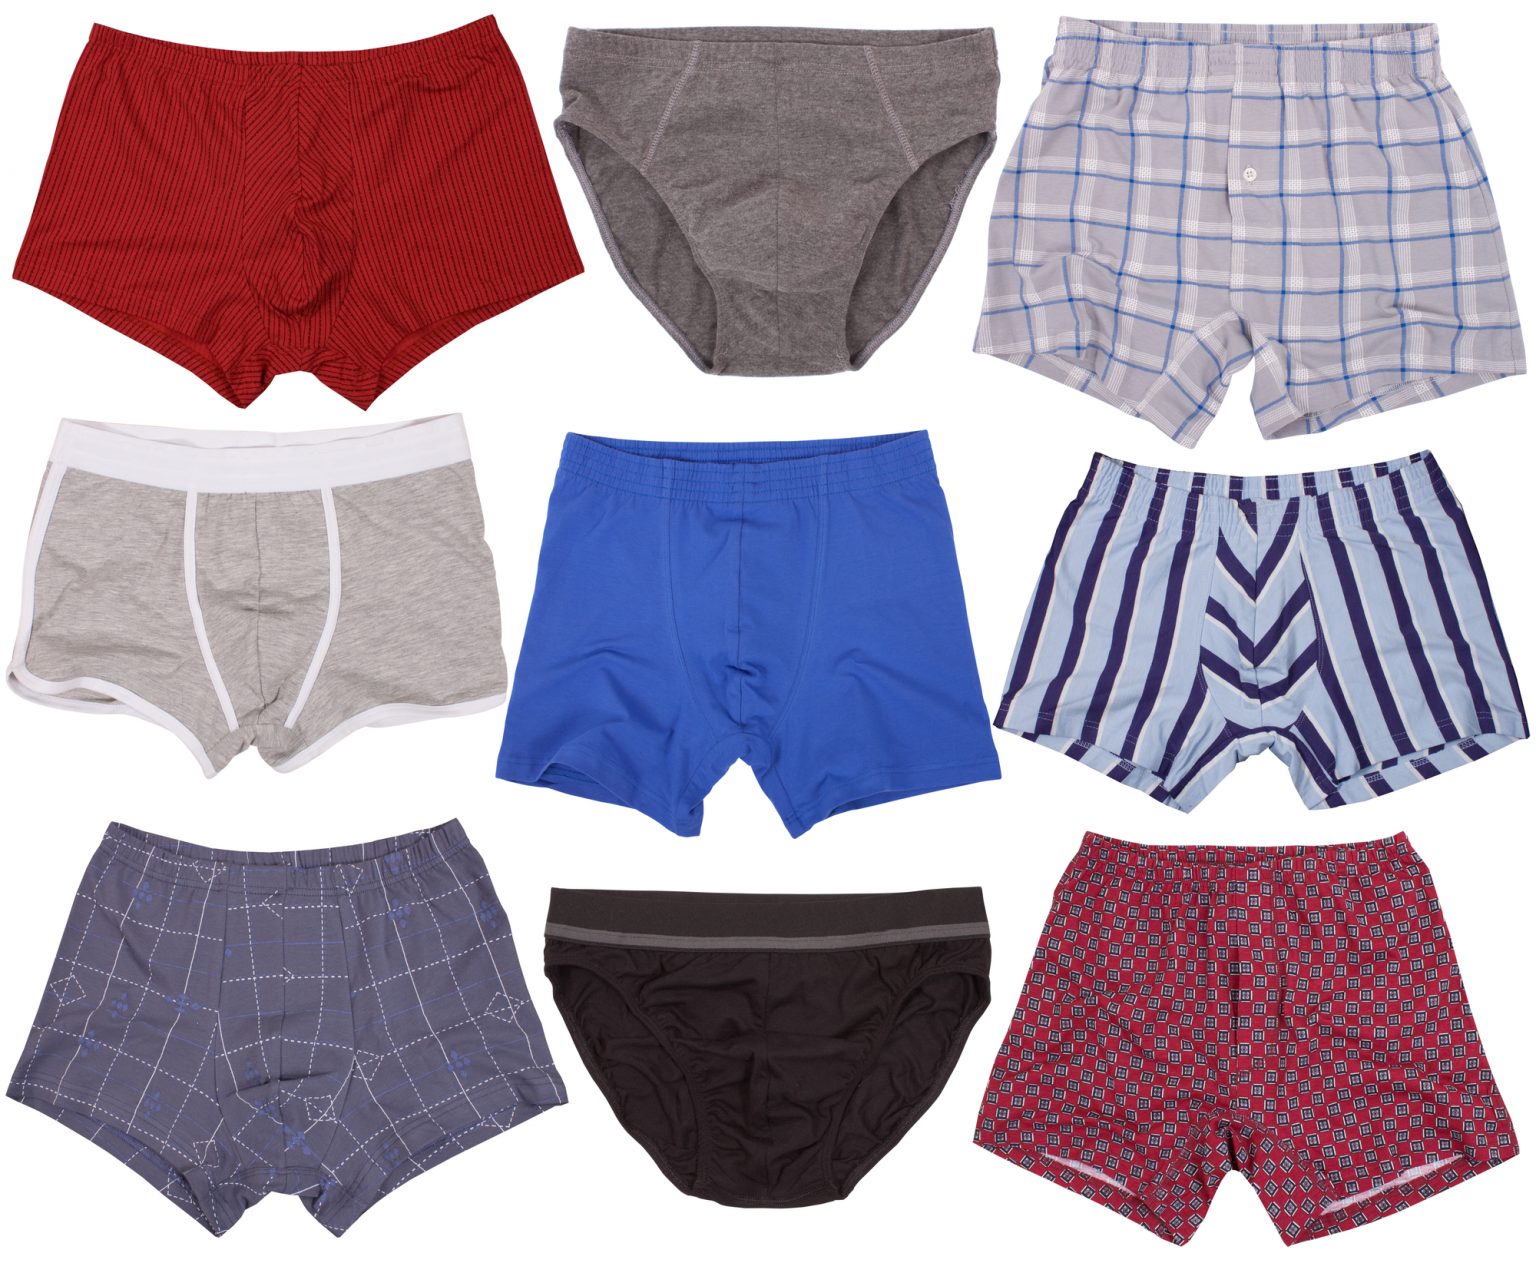 How Many Pairs of Underwear Should a Man Have? (The Multiple Scenarios ...